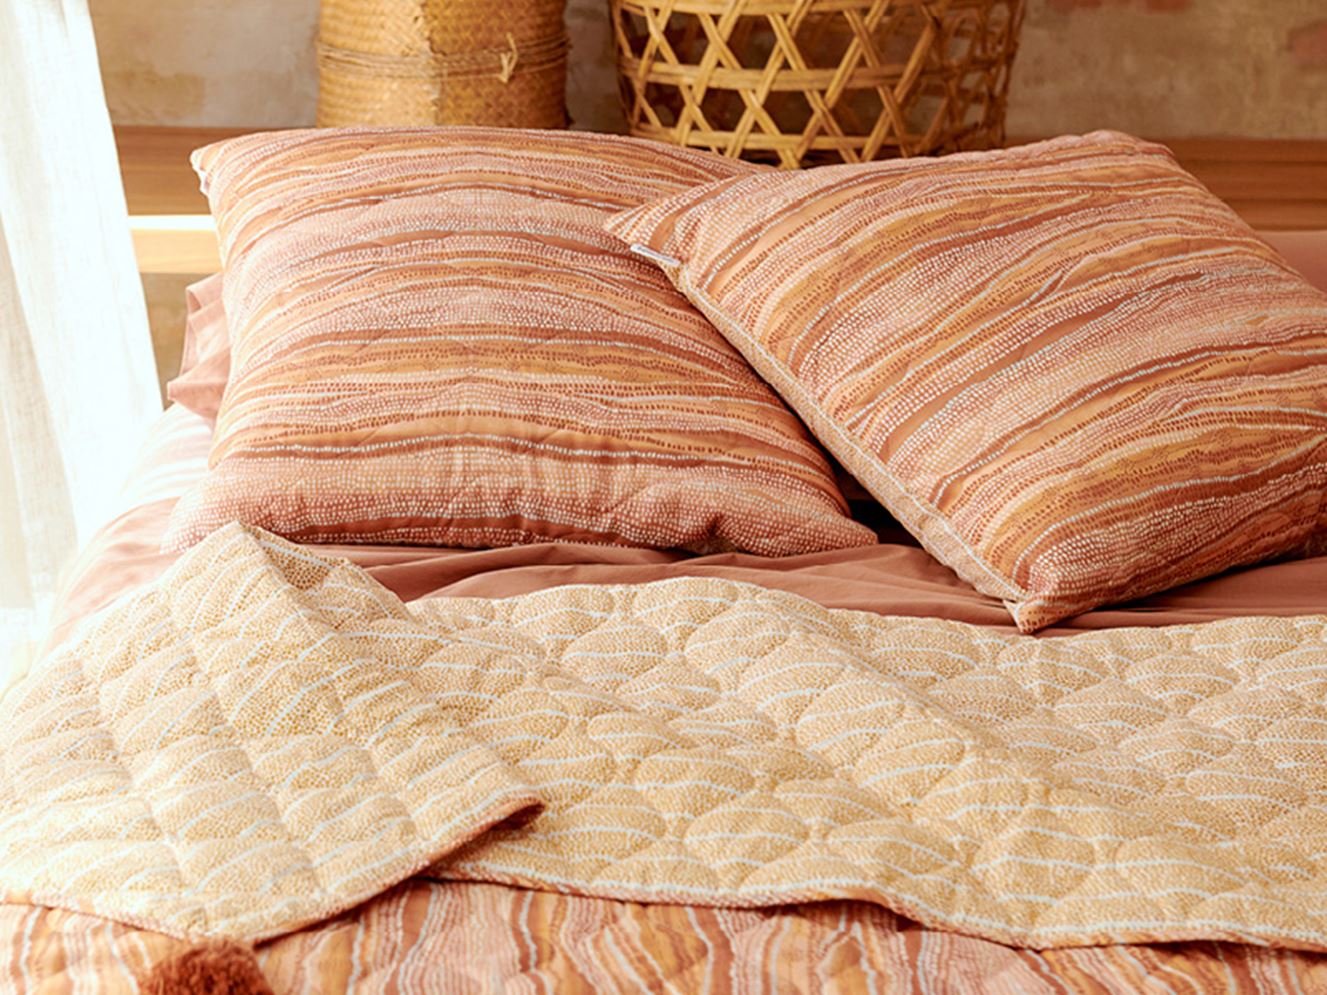 Two cushions styled on a bed to accompany the coverlet, in tones of earth and lighter shades of pink, yellow and orange.